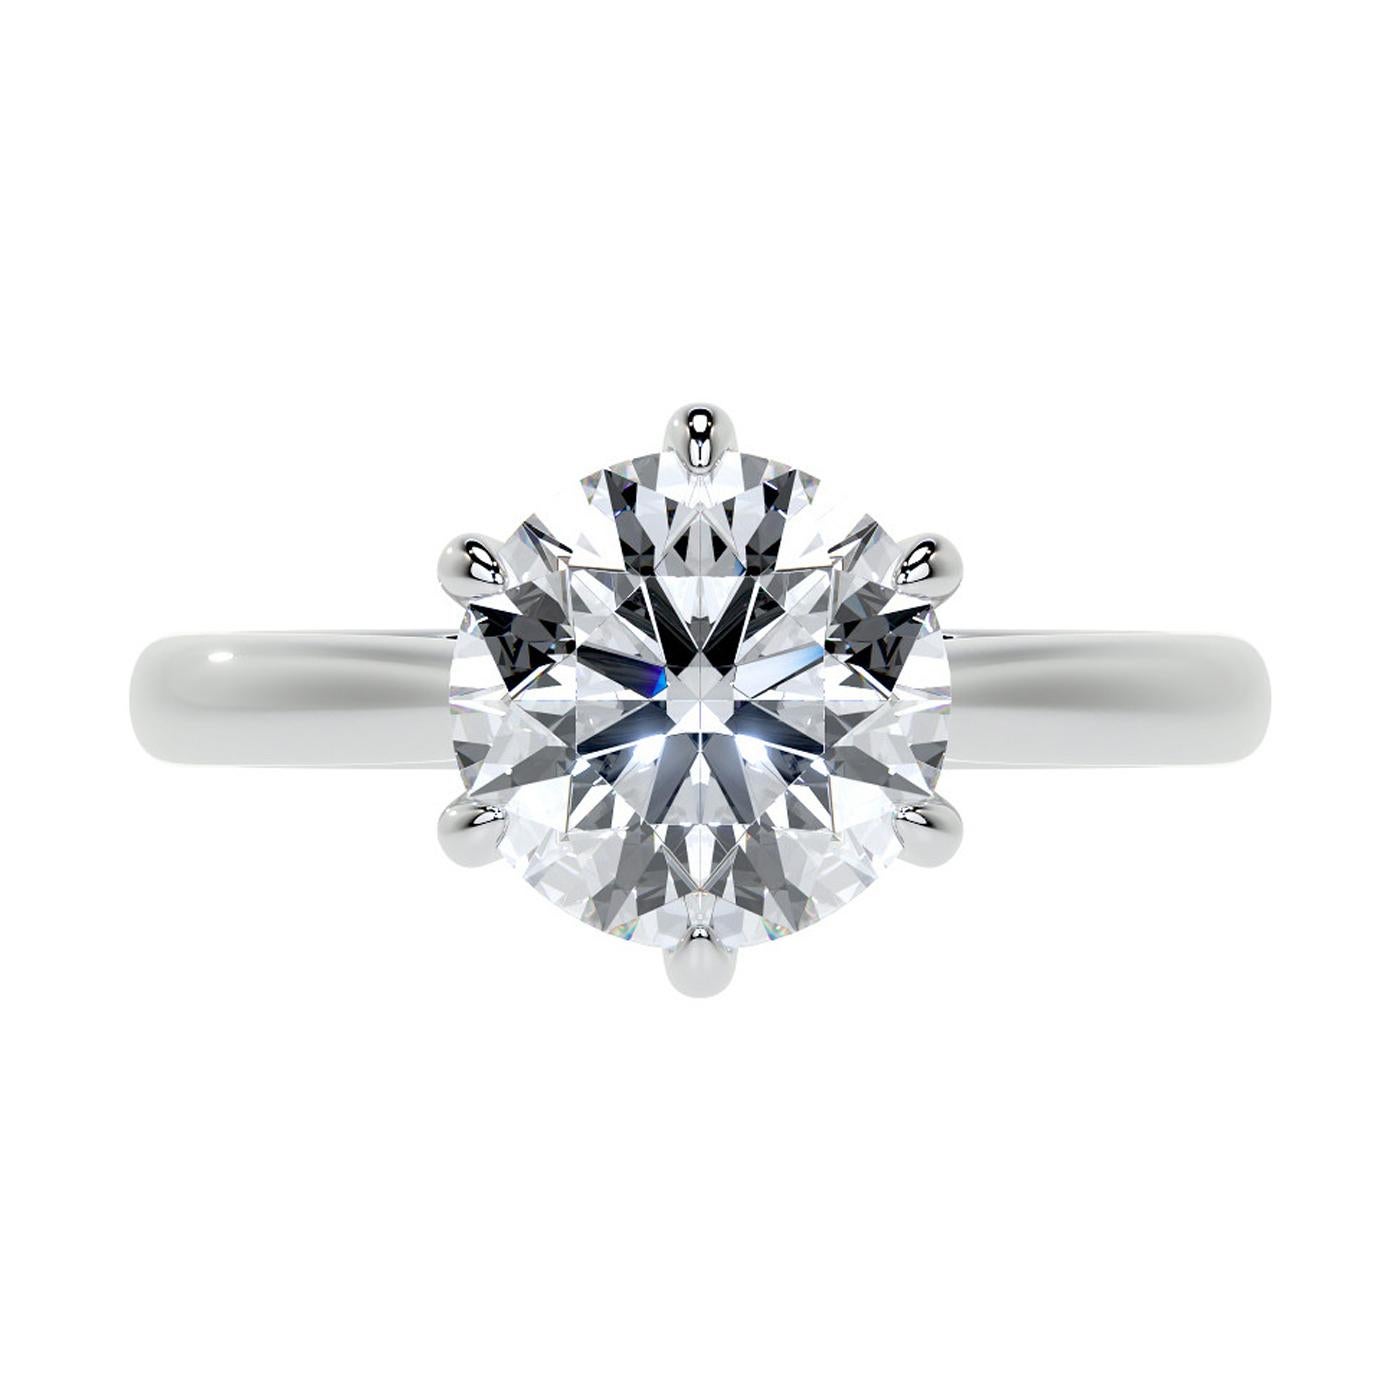 This stunning solitaire engagement ring features a GIA-certified round brilliant cut diamond in a six-prong platinum setting. The diamond in this ring is weighing 1.77 carats round brilliant cut with I color and VS1 clarity, This is the perfect gift